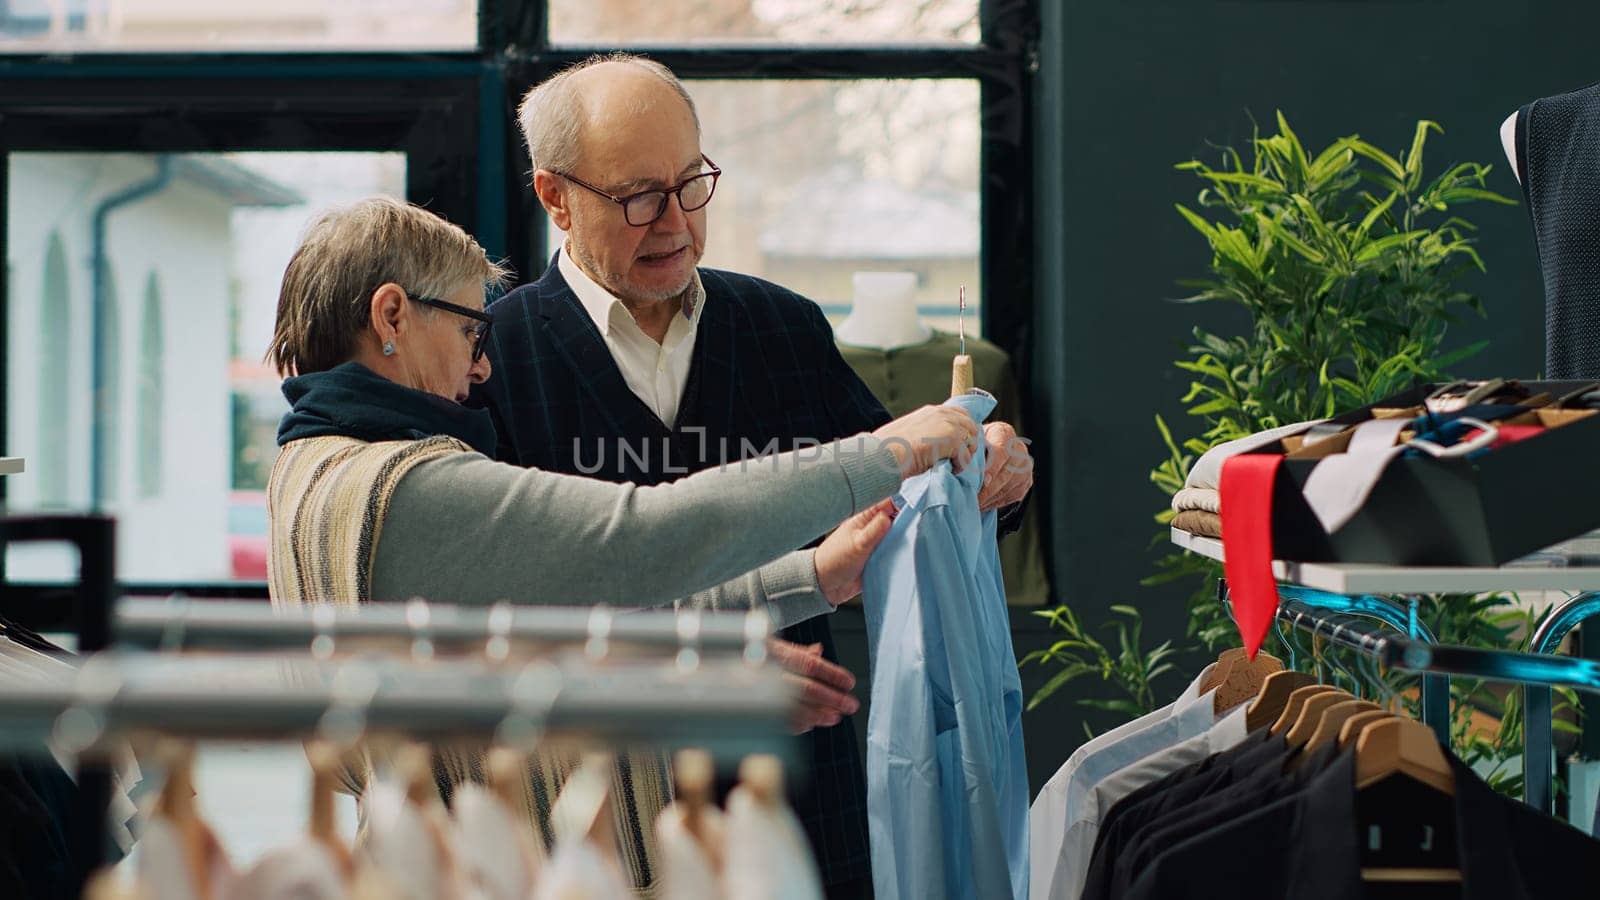 Senior couple shopping for formal outerwear at fashion boutique, looking for trendy elegant clothing items to create new outfits for elderly man. People searching for stylish merchandise. Camera A.